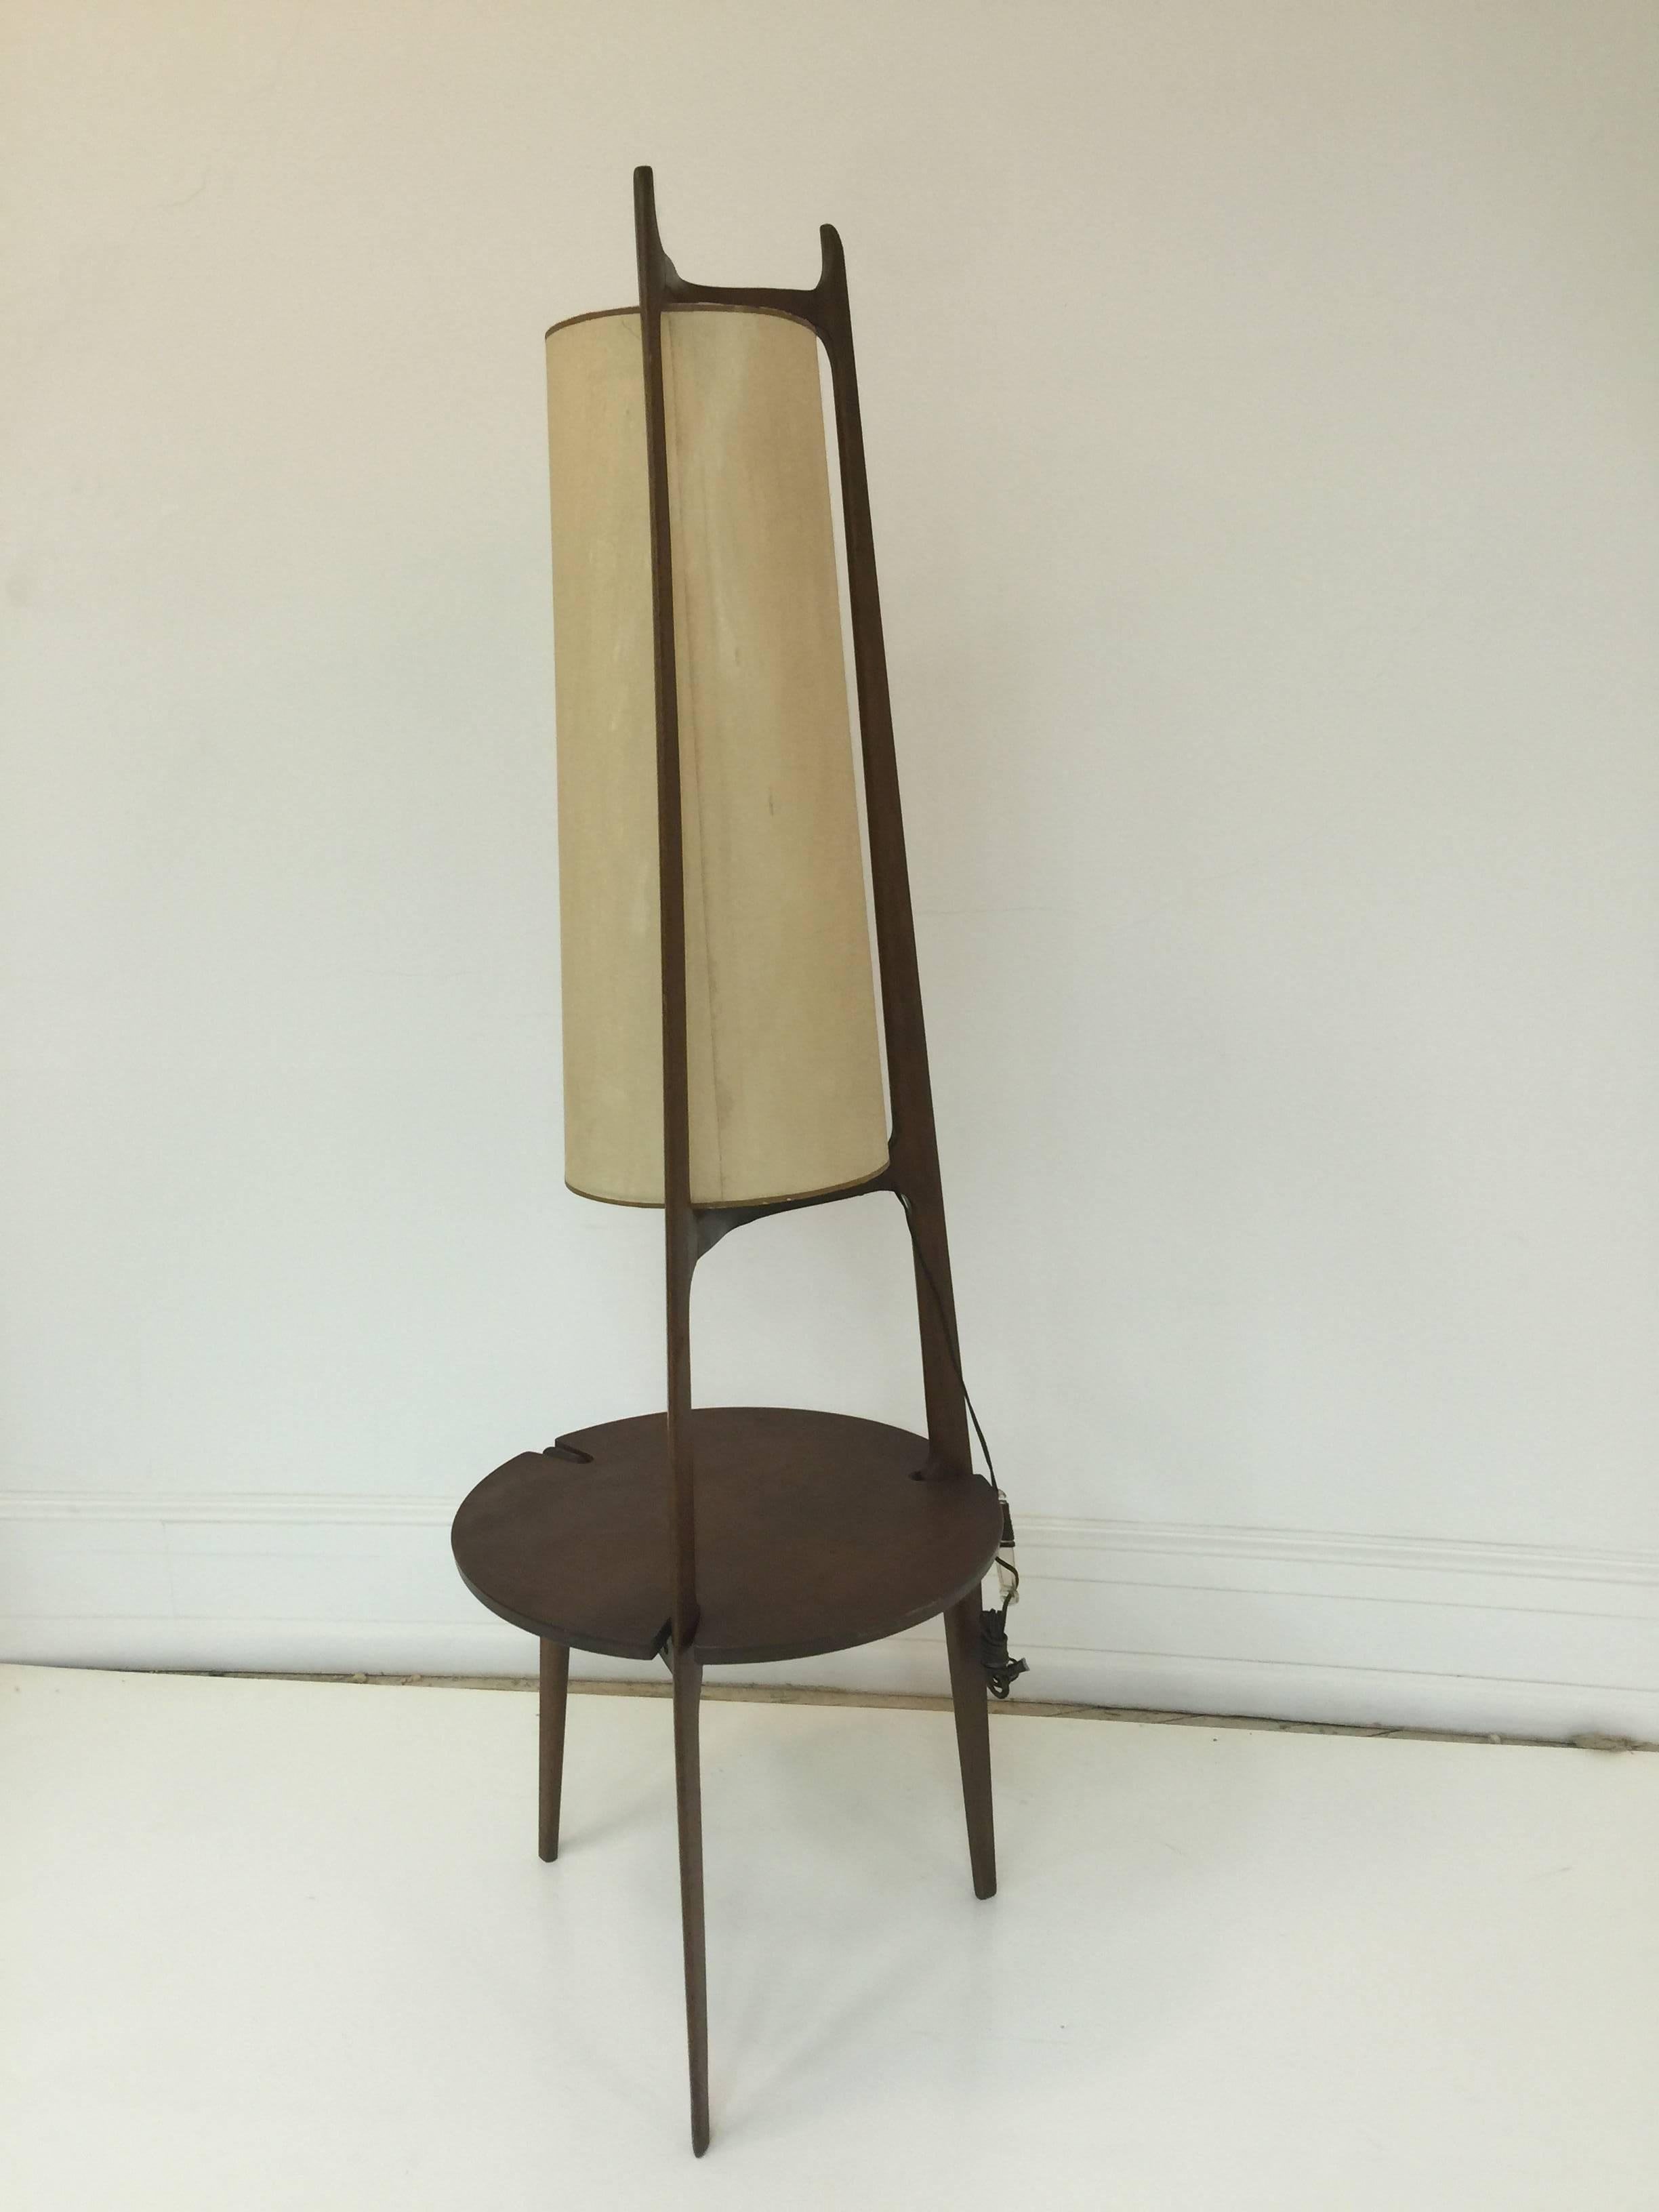 A Scandinavian modern lamp table or floor lamp in teak with tripod base, circa 1960s.

Overall height is 66